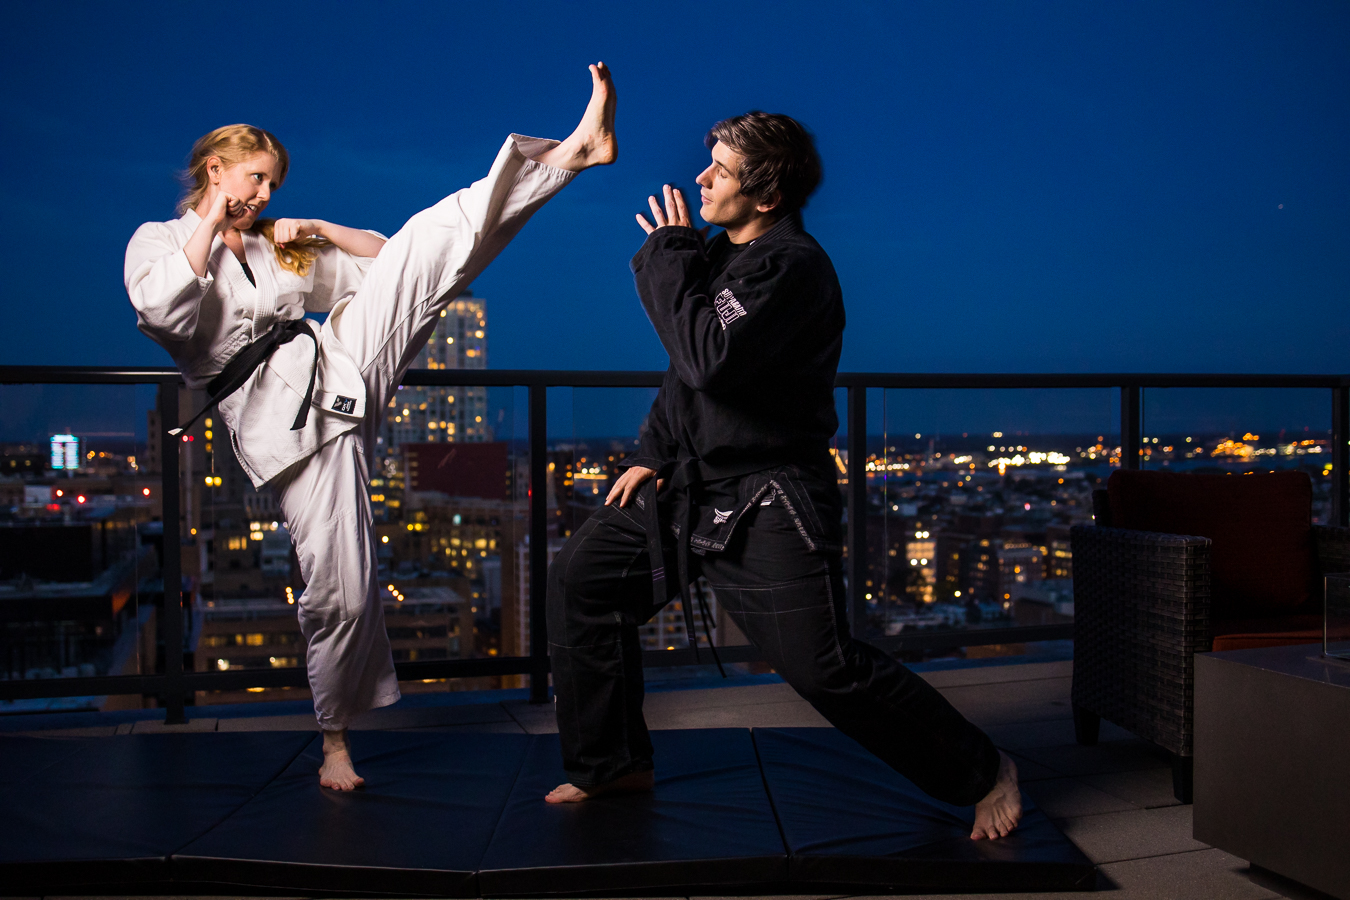 Creative Philadelphia Wedding Photographer, lisa rhinehart, captures this unique, fun, creative image of this couple during their rooftop engagement session doing jiu-jitsu together 